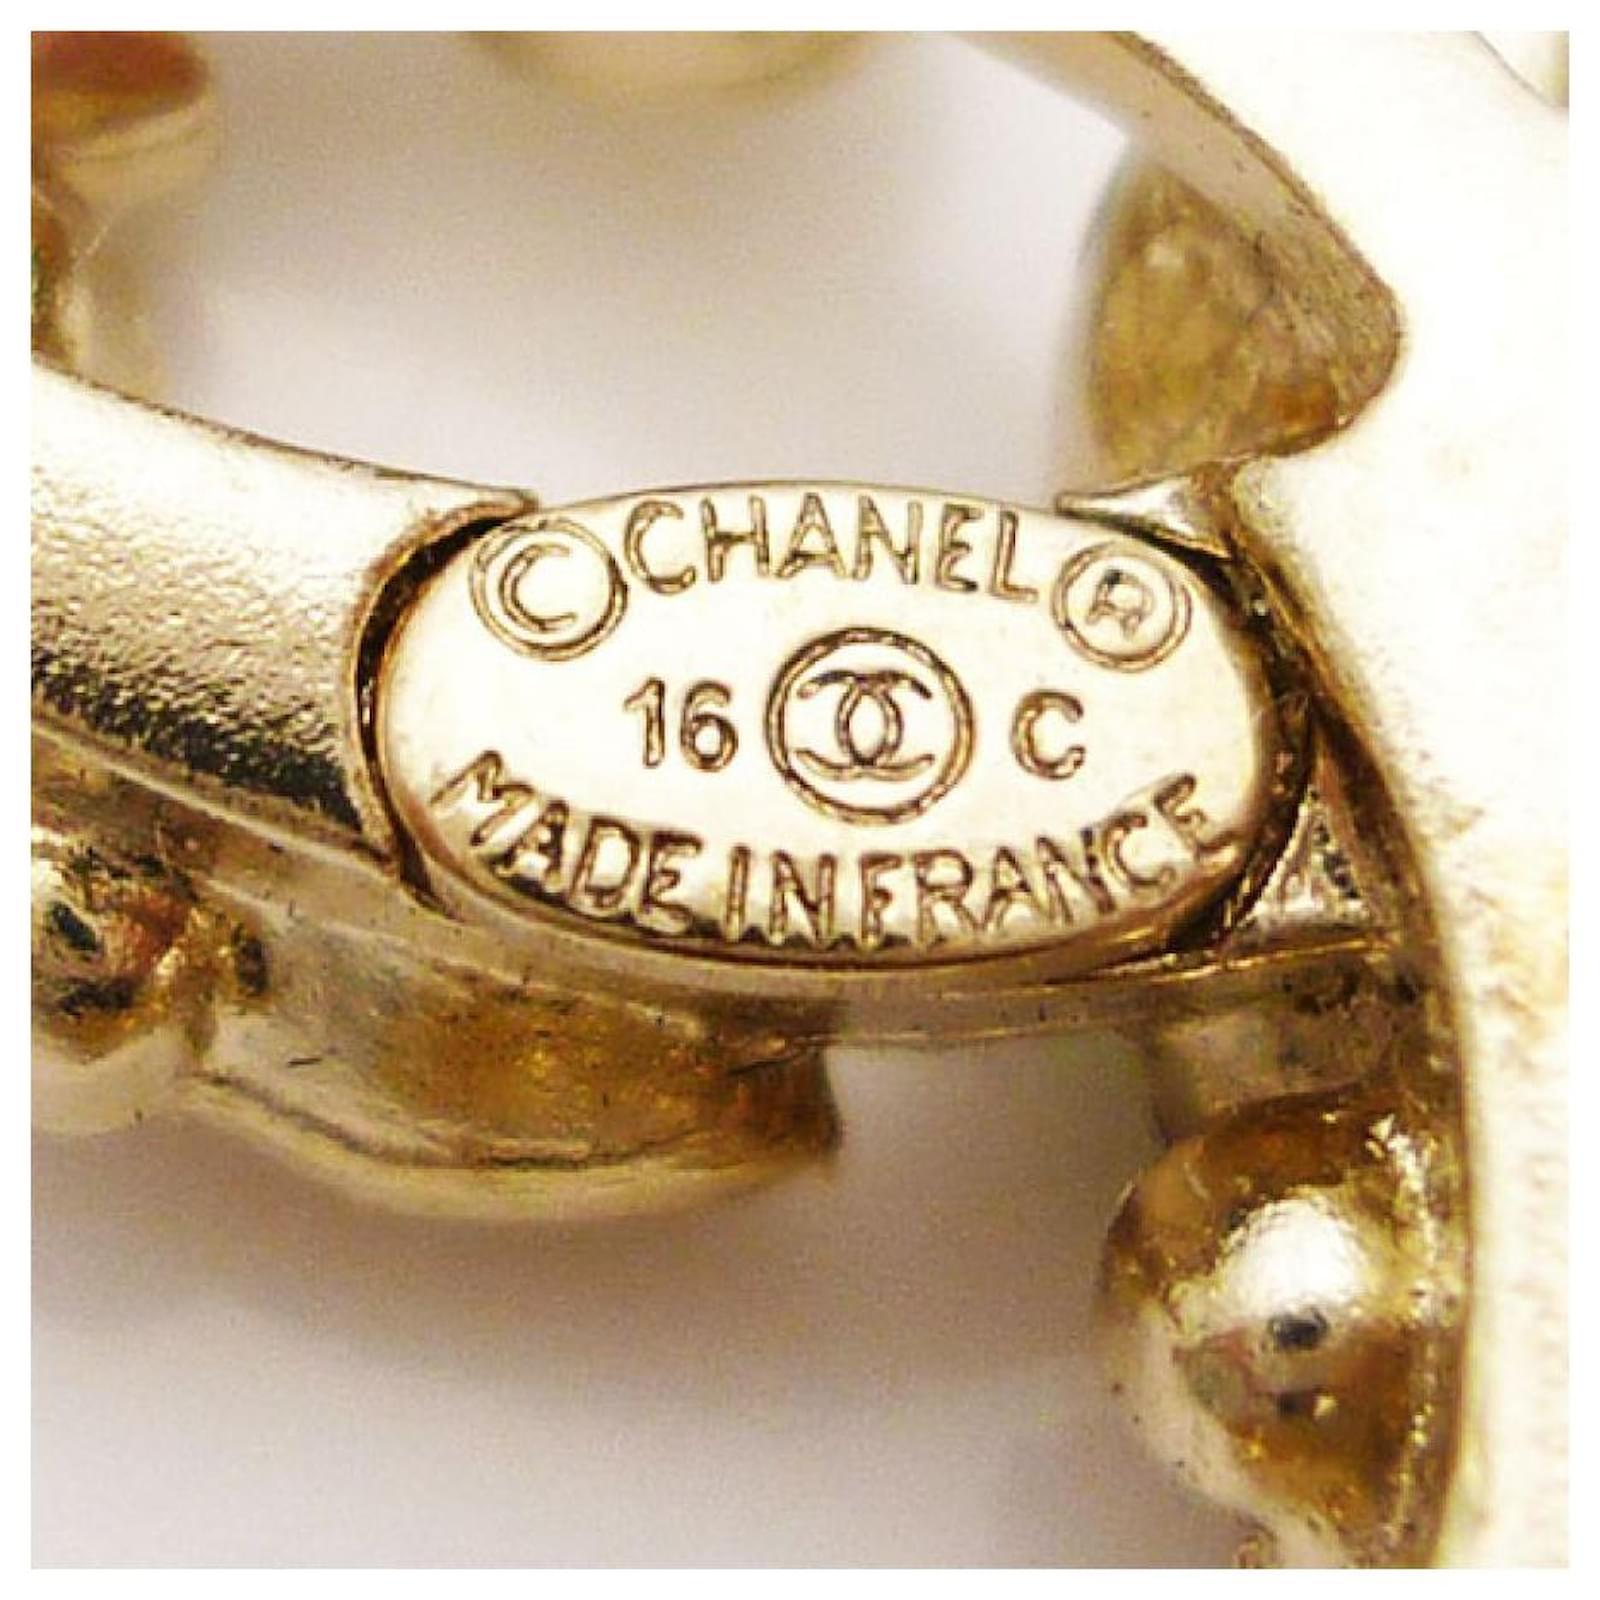 Used] [CHANEL] 16C engraved fake pearl Coco mark Bijou brooch Gold